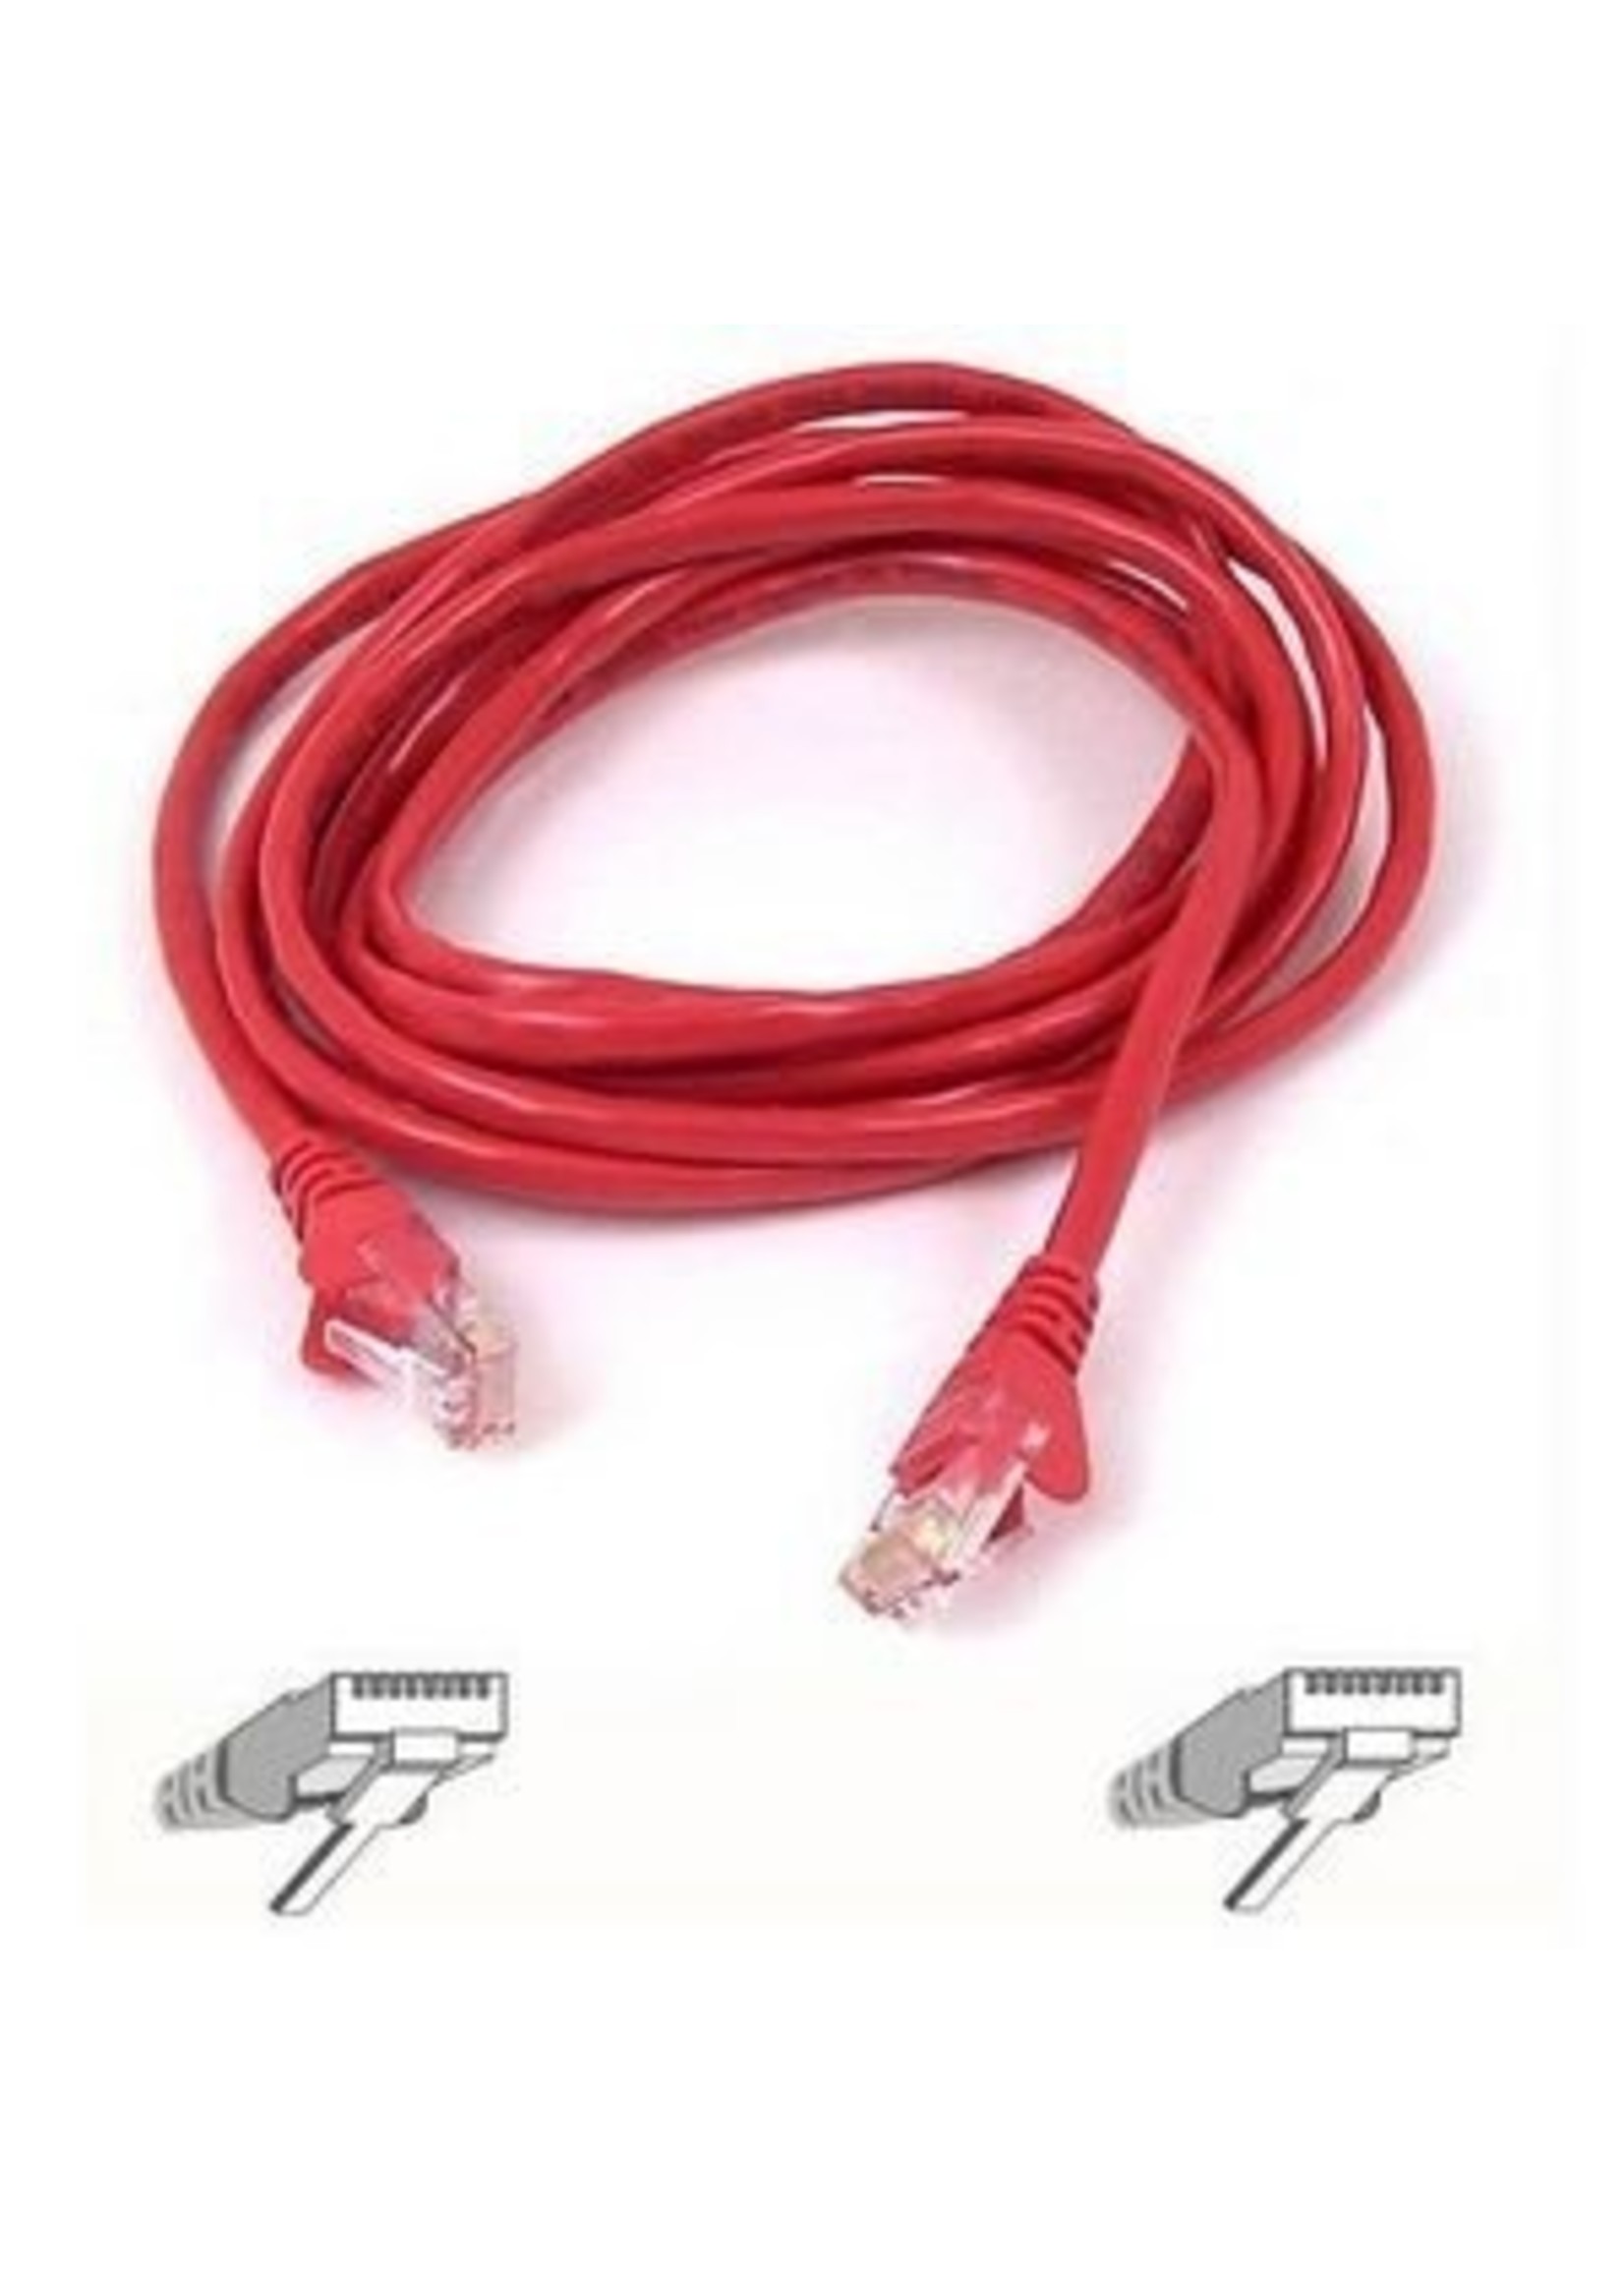 Tera Grand 3 FT Patch Cable Red Cat5e